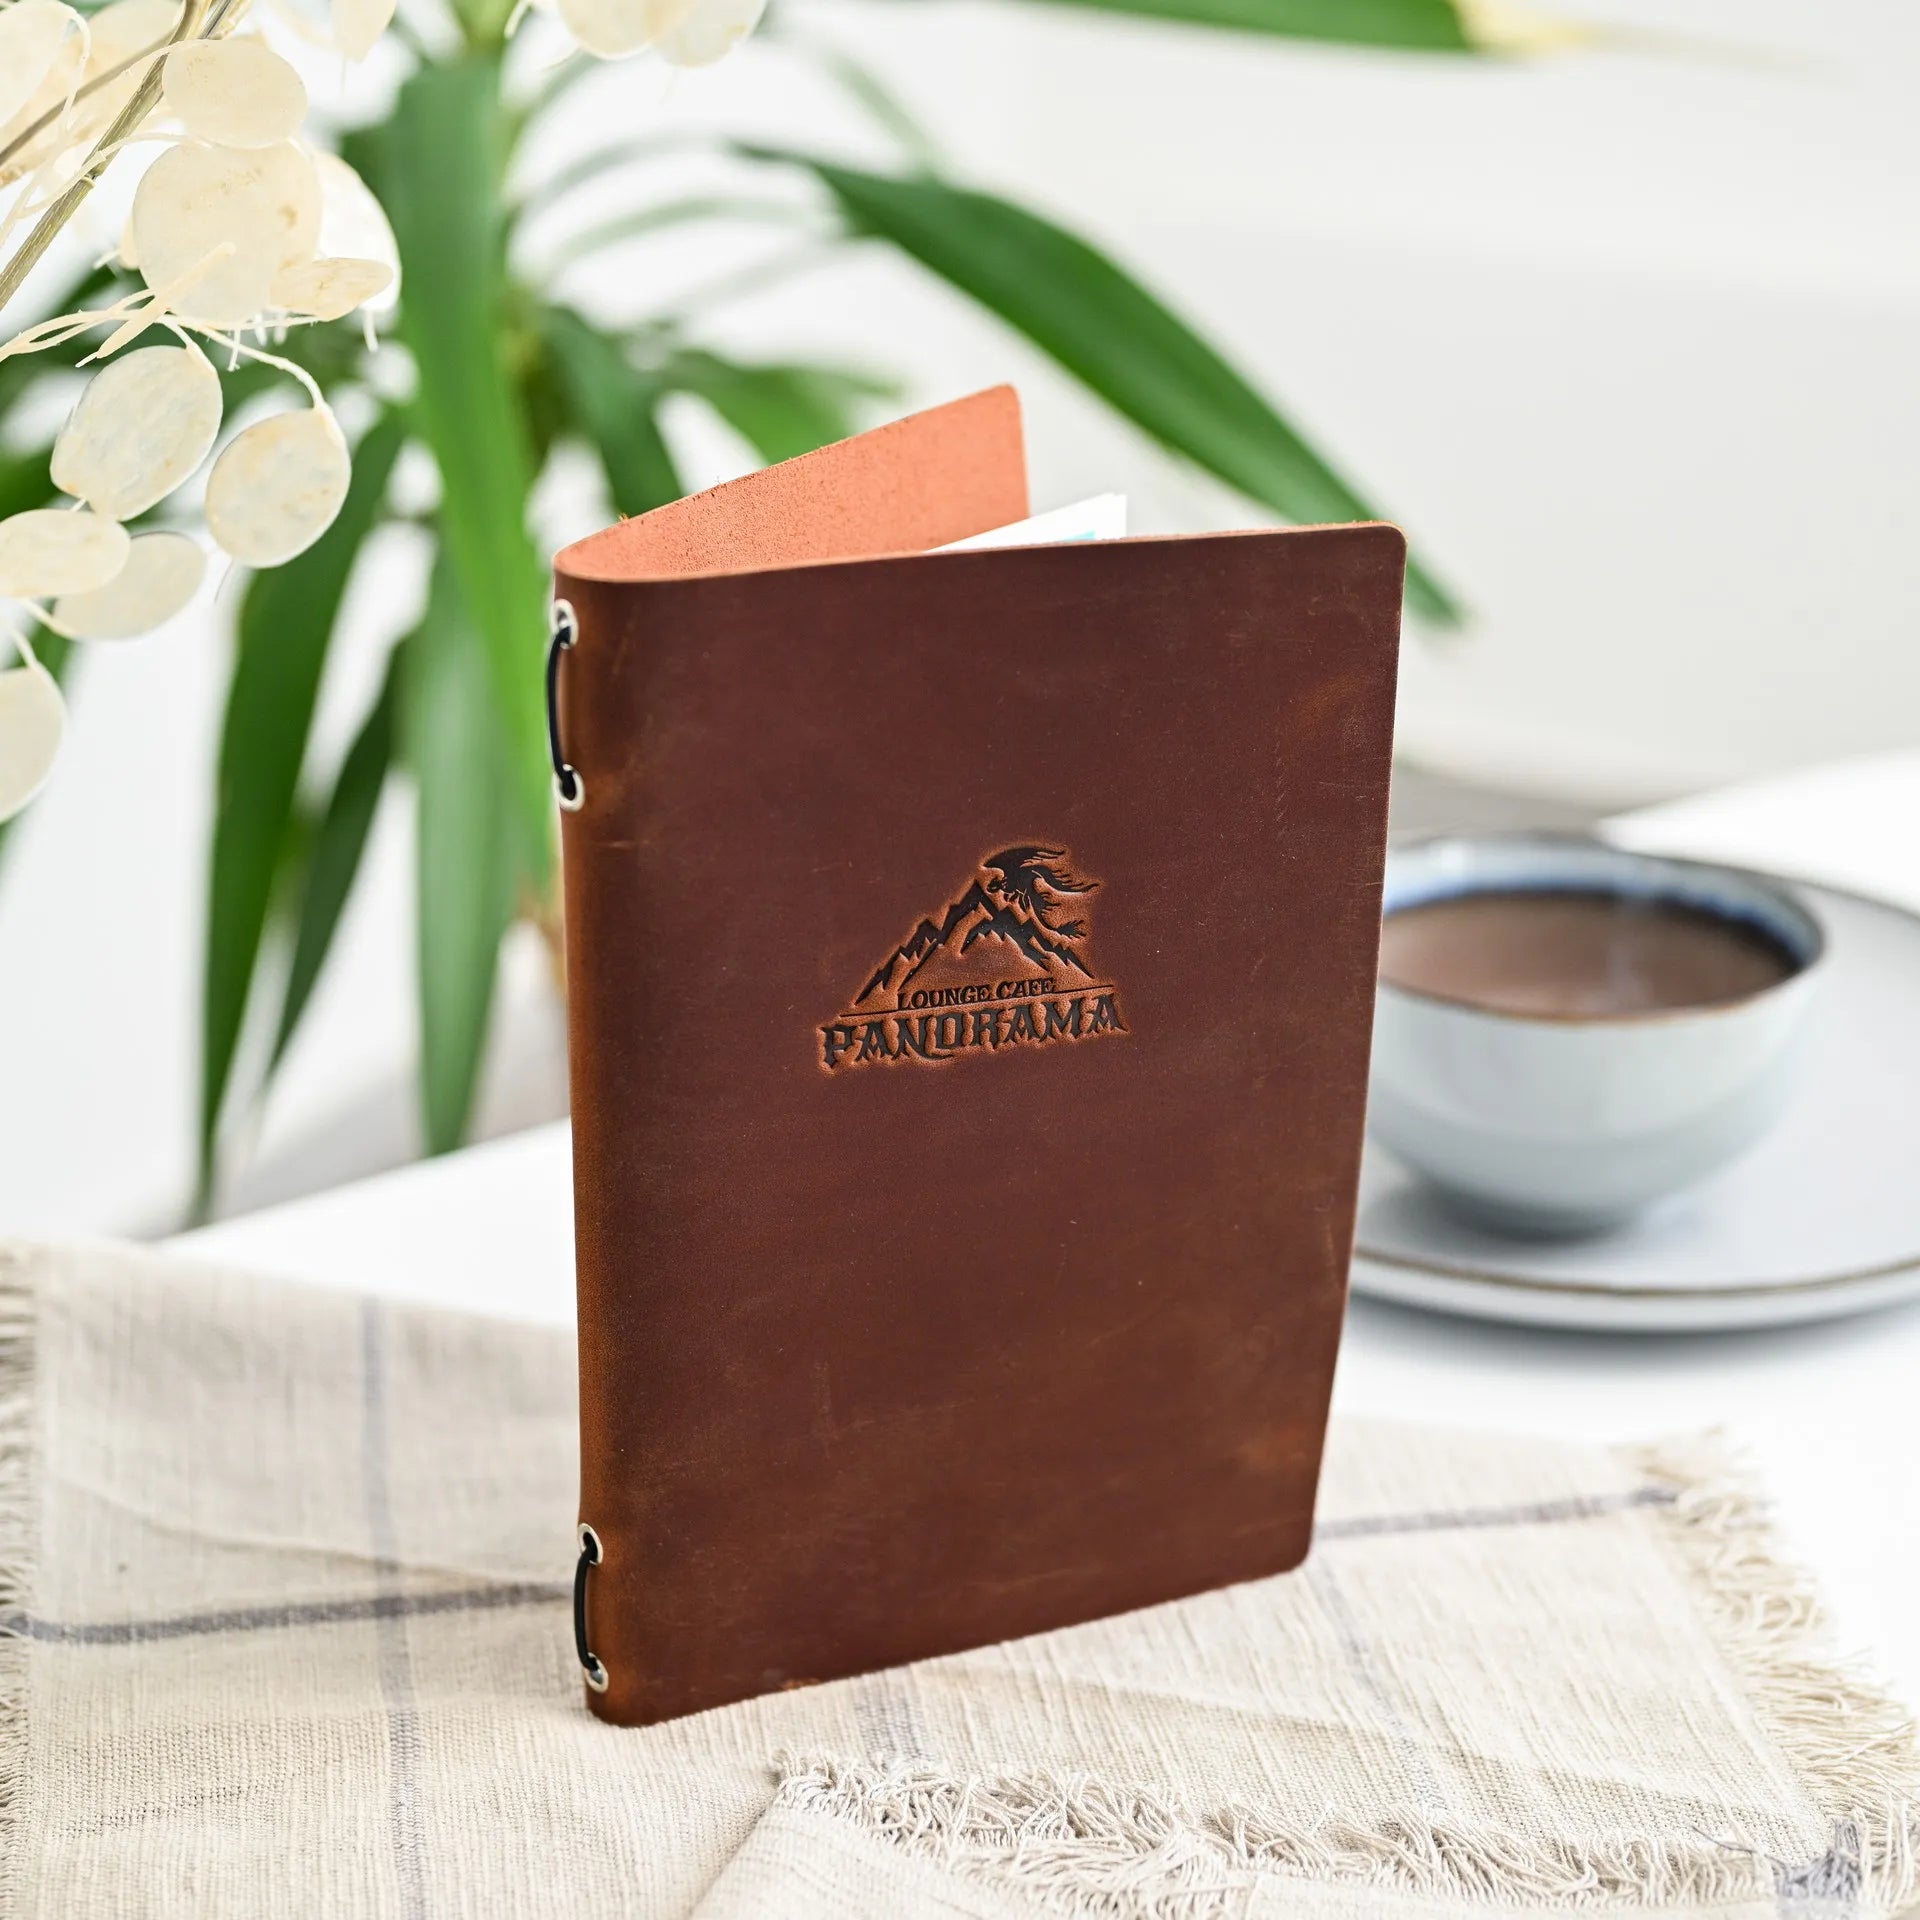 Elevate your café’s menu with our classic leather cover, designed for a polished and professional look.